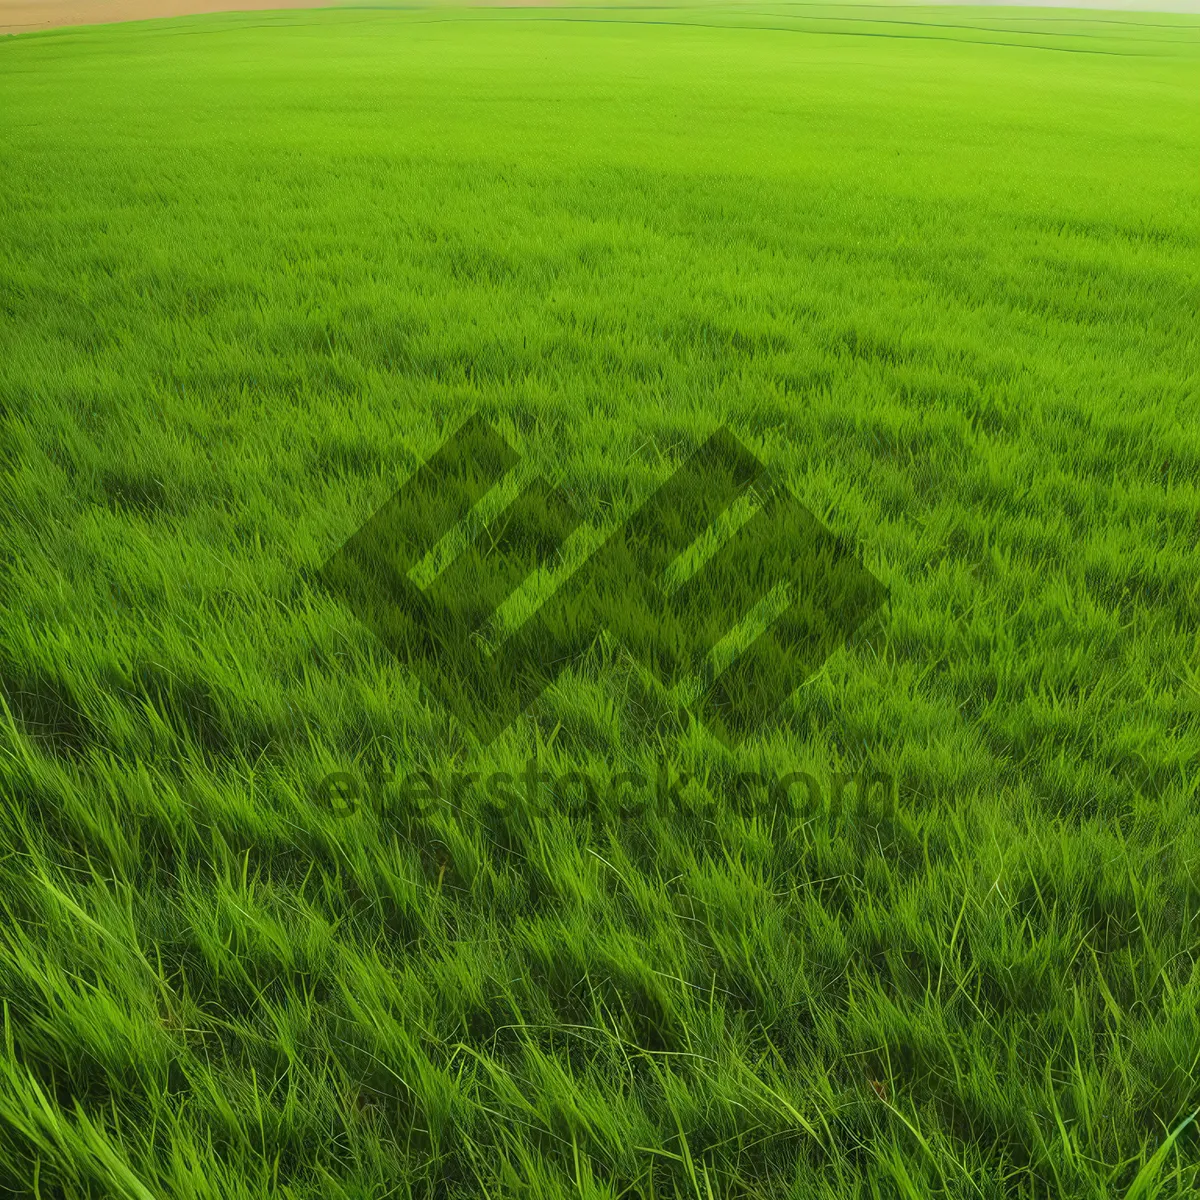 Picture of Serene Summer Wheat Field